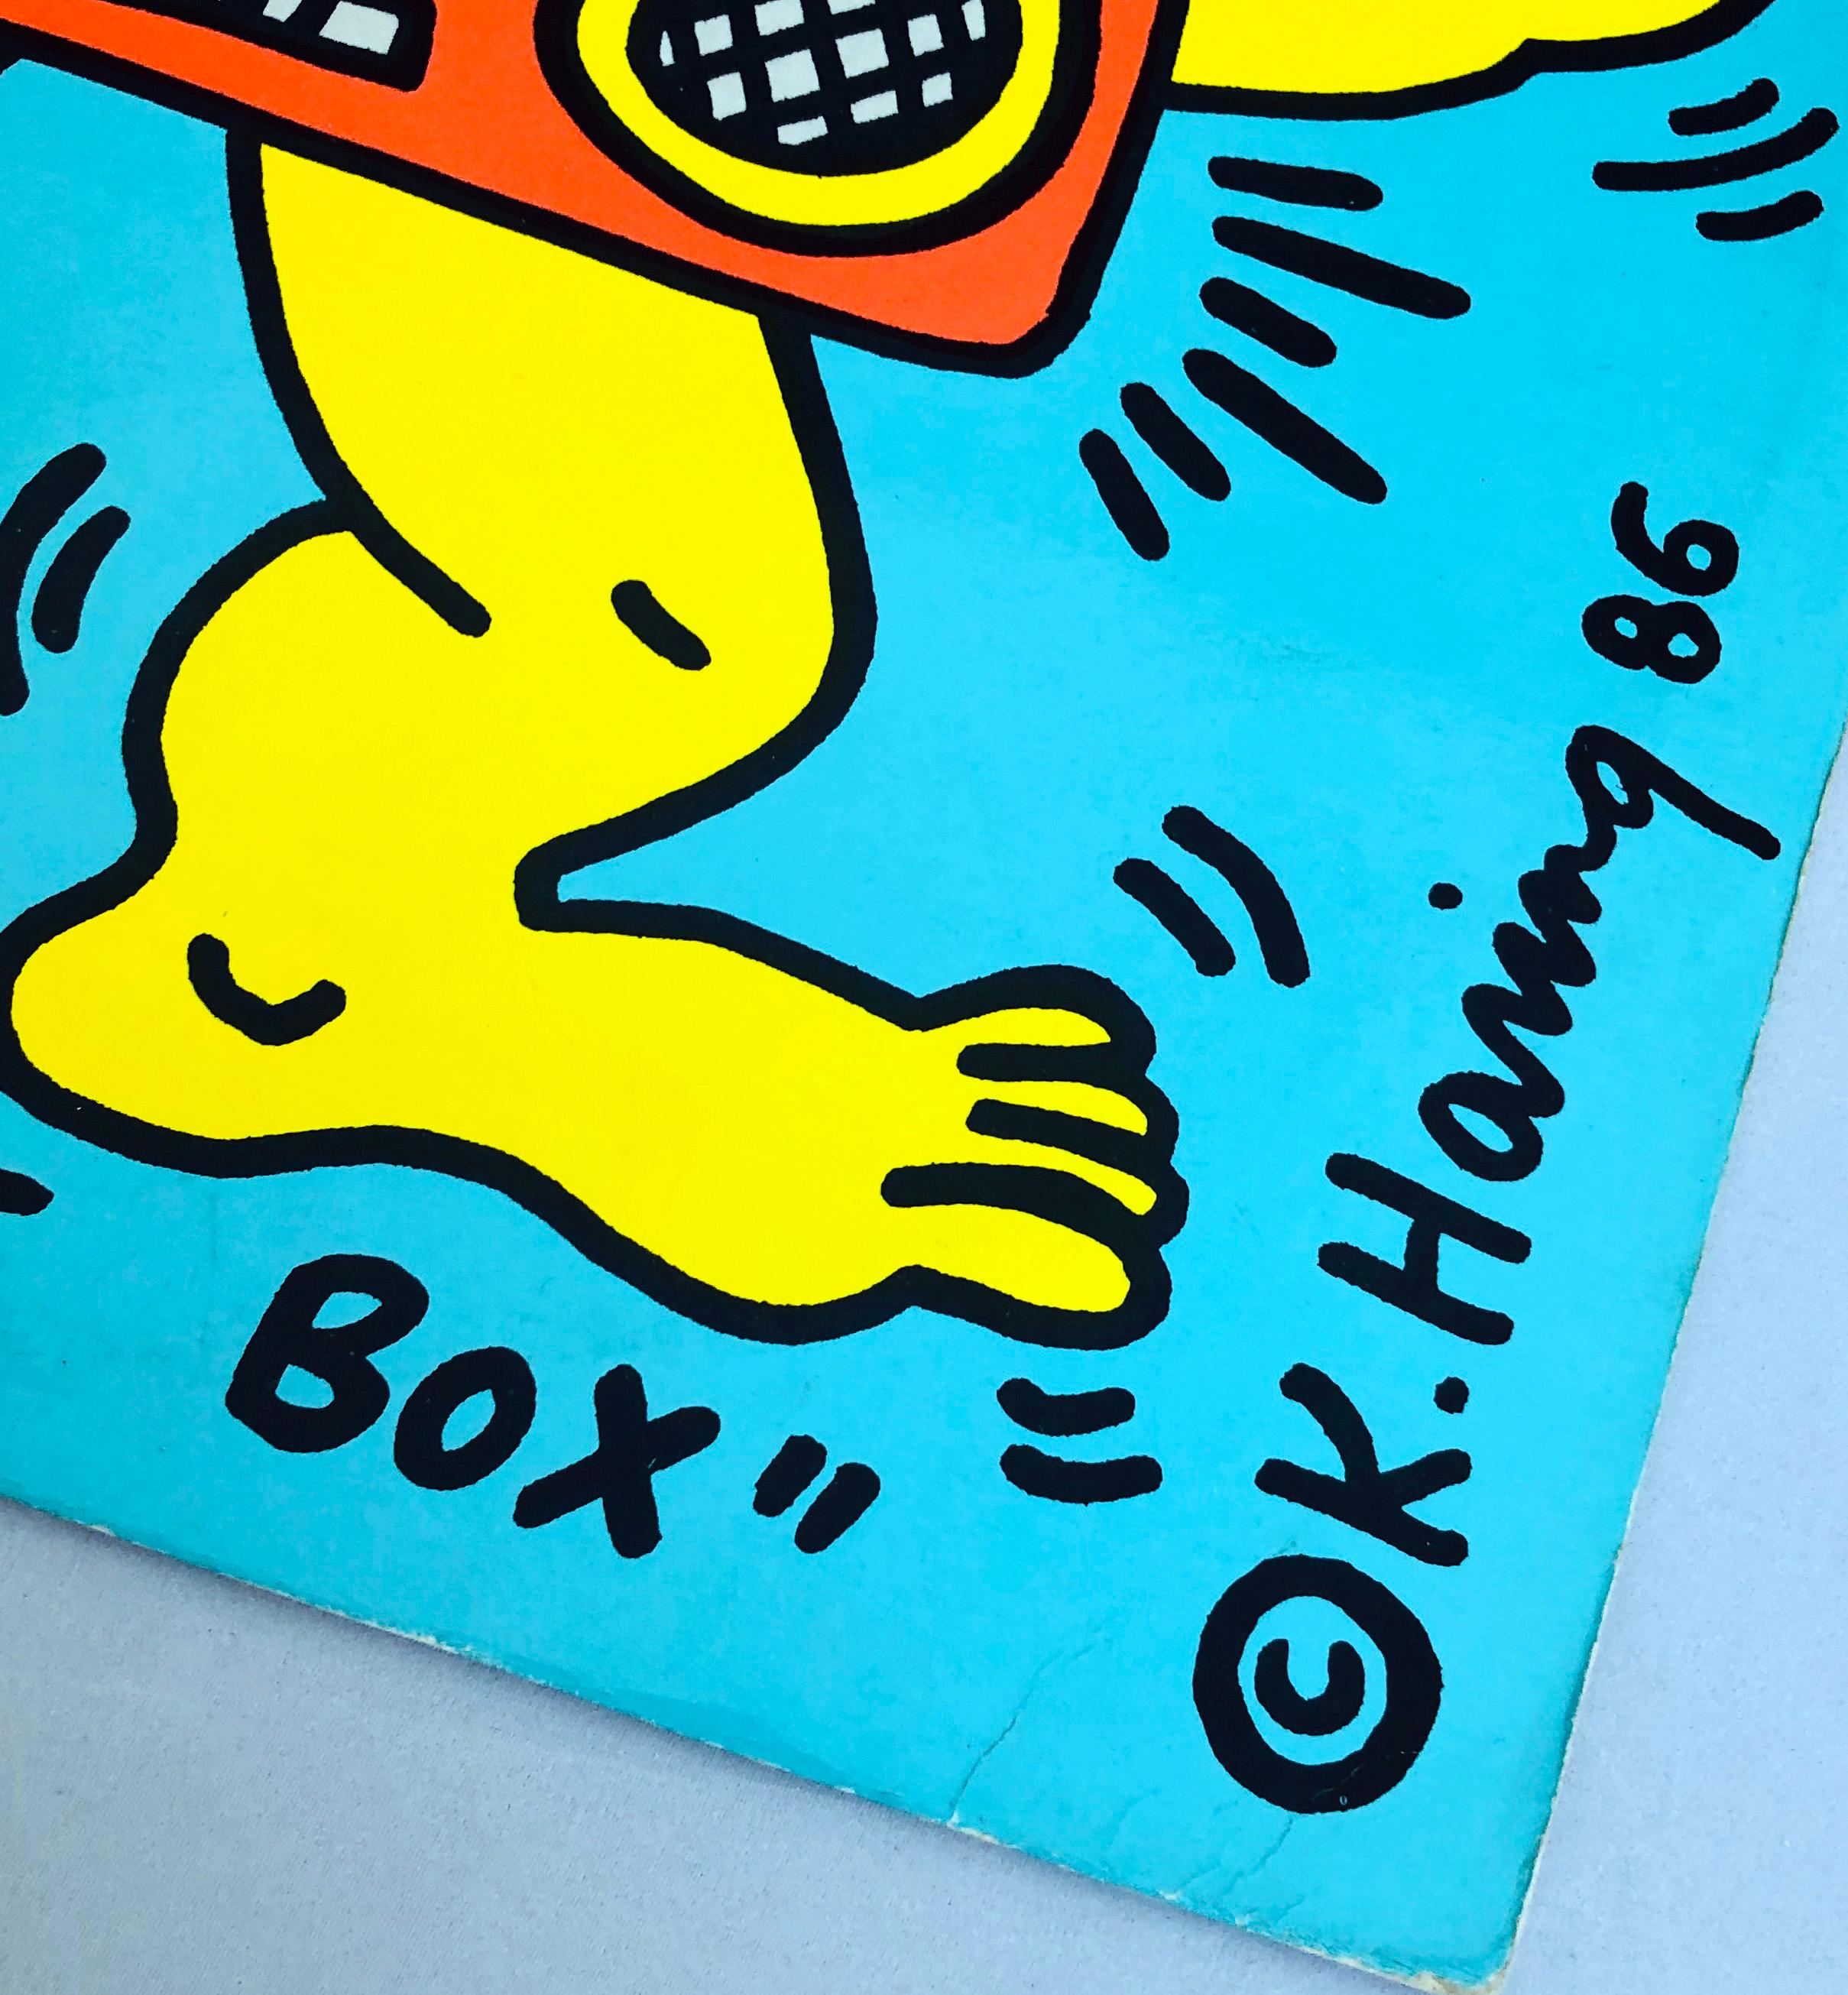 Keith Haring 'The Baby Beat Box' 
A rare highly sought after vinyl art cover featuring original artwork by Keith Haring. Truly vibrant colors that make for stand-out wall art. 

Off-Set Lithograph on vinyl record jacket, 1986
Dimensions: 12 x 12